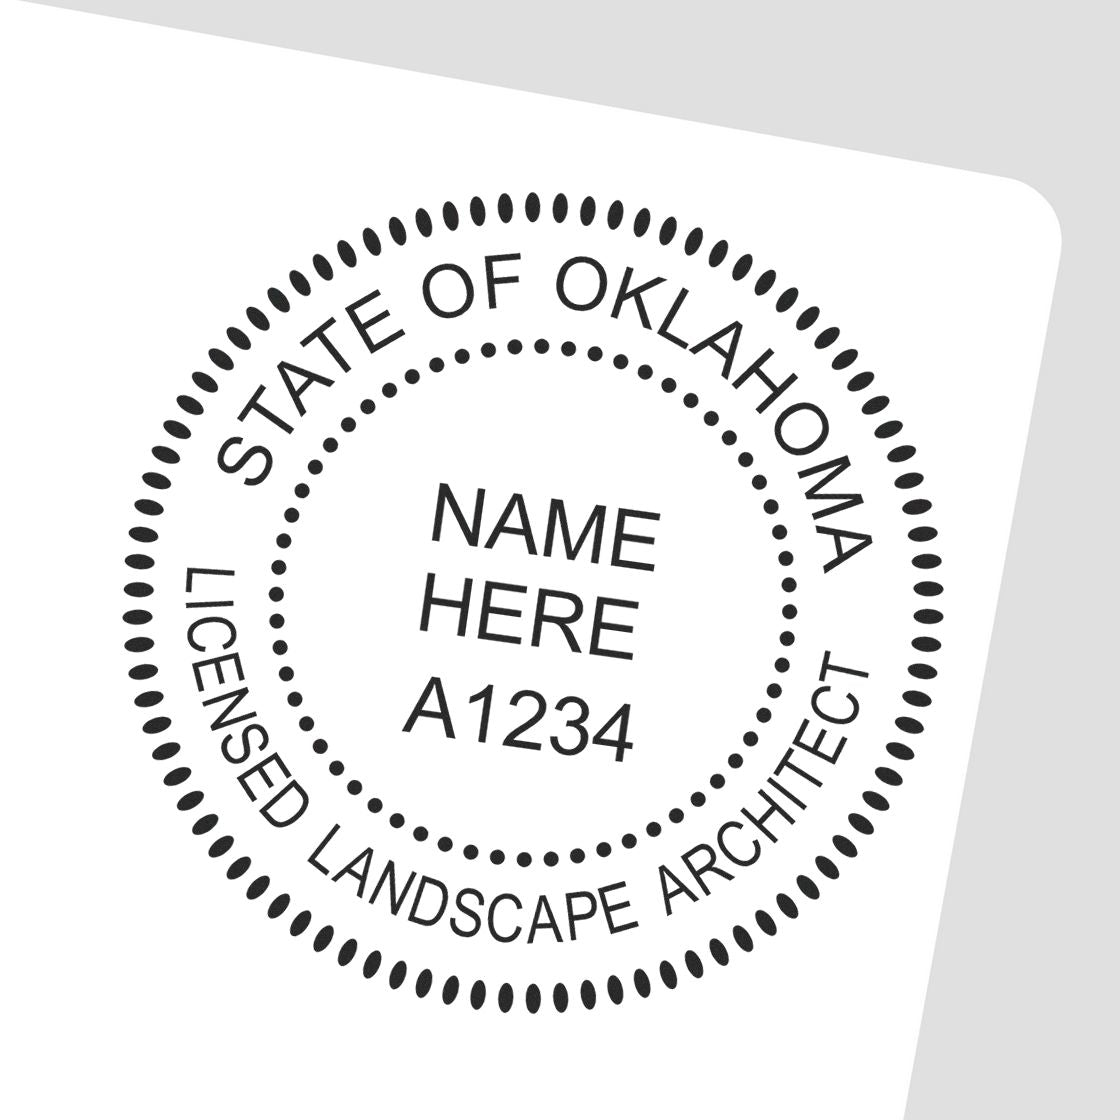 Slim Pre-Inked Oklahoma Landscape Architect Seal Stamp in use photo showing a stamped imprint of the Slim Pre-Inked Oklahoma Landscape Architect Seal Stamp